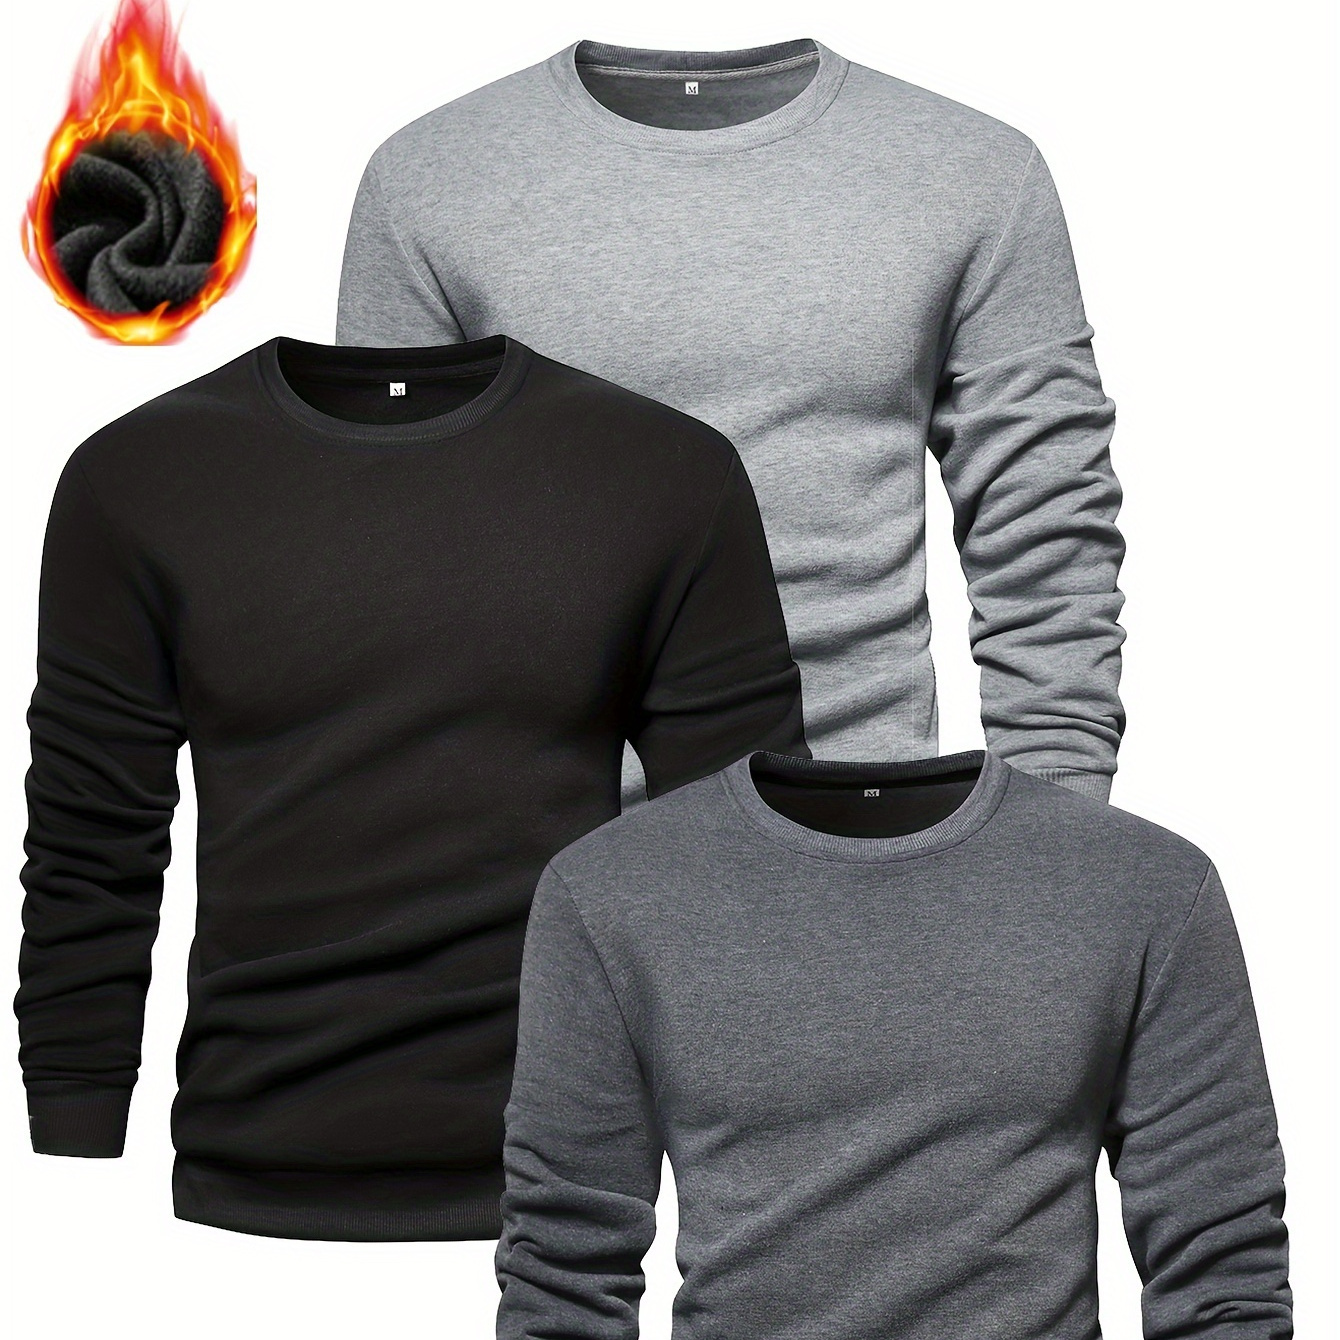 

3pcs Solid Men's Autumn And Winter Knitted Sweatshirt, Long Sleeve Crew Neck Warm Loose Sports Top